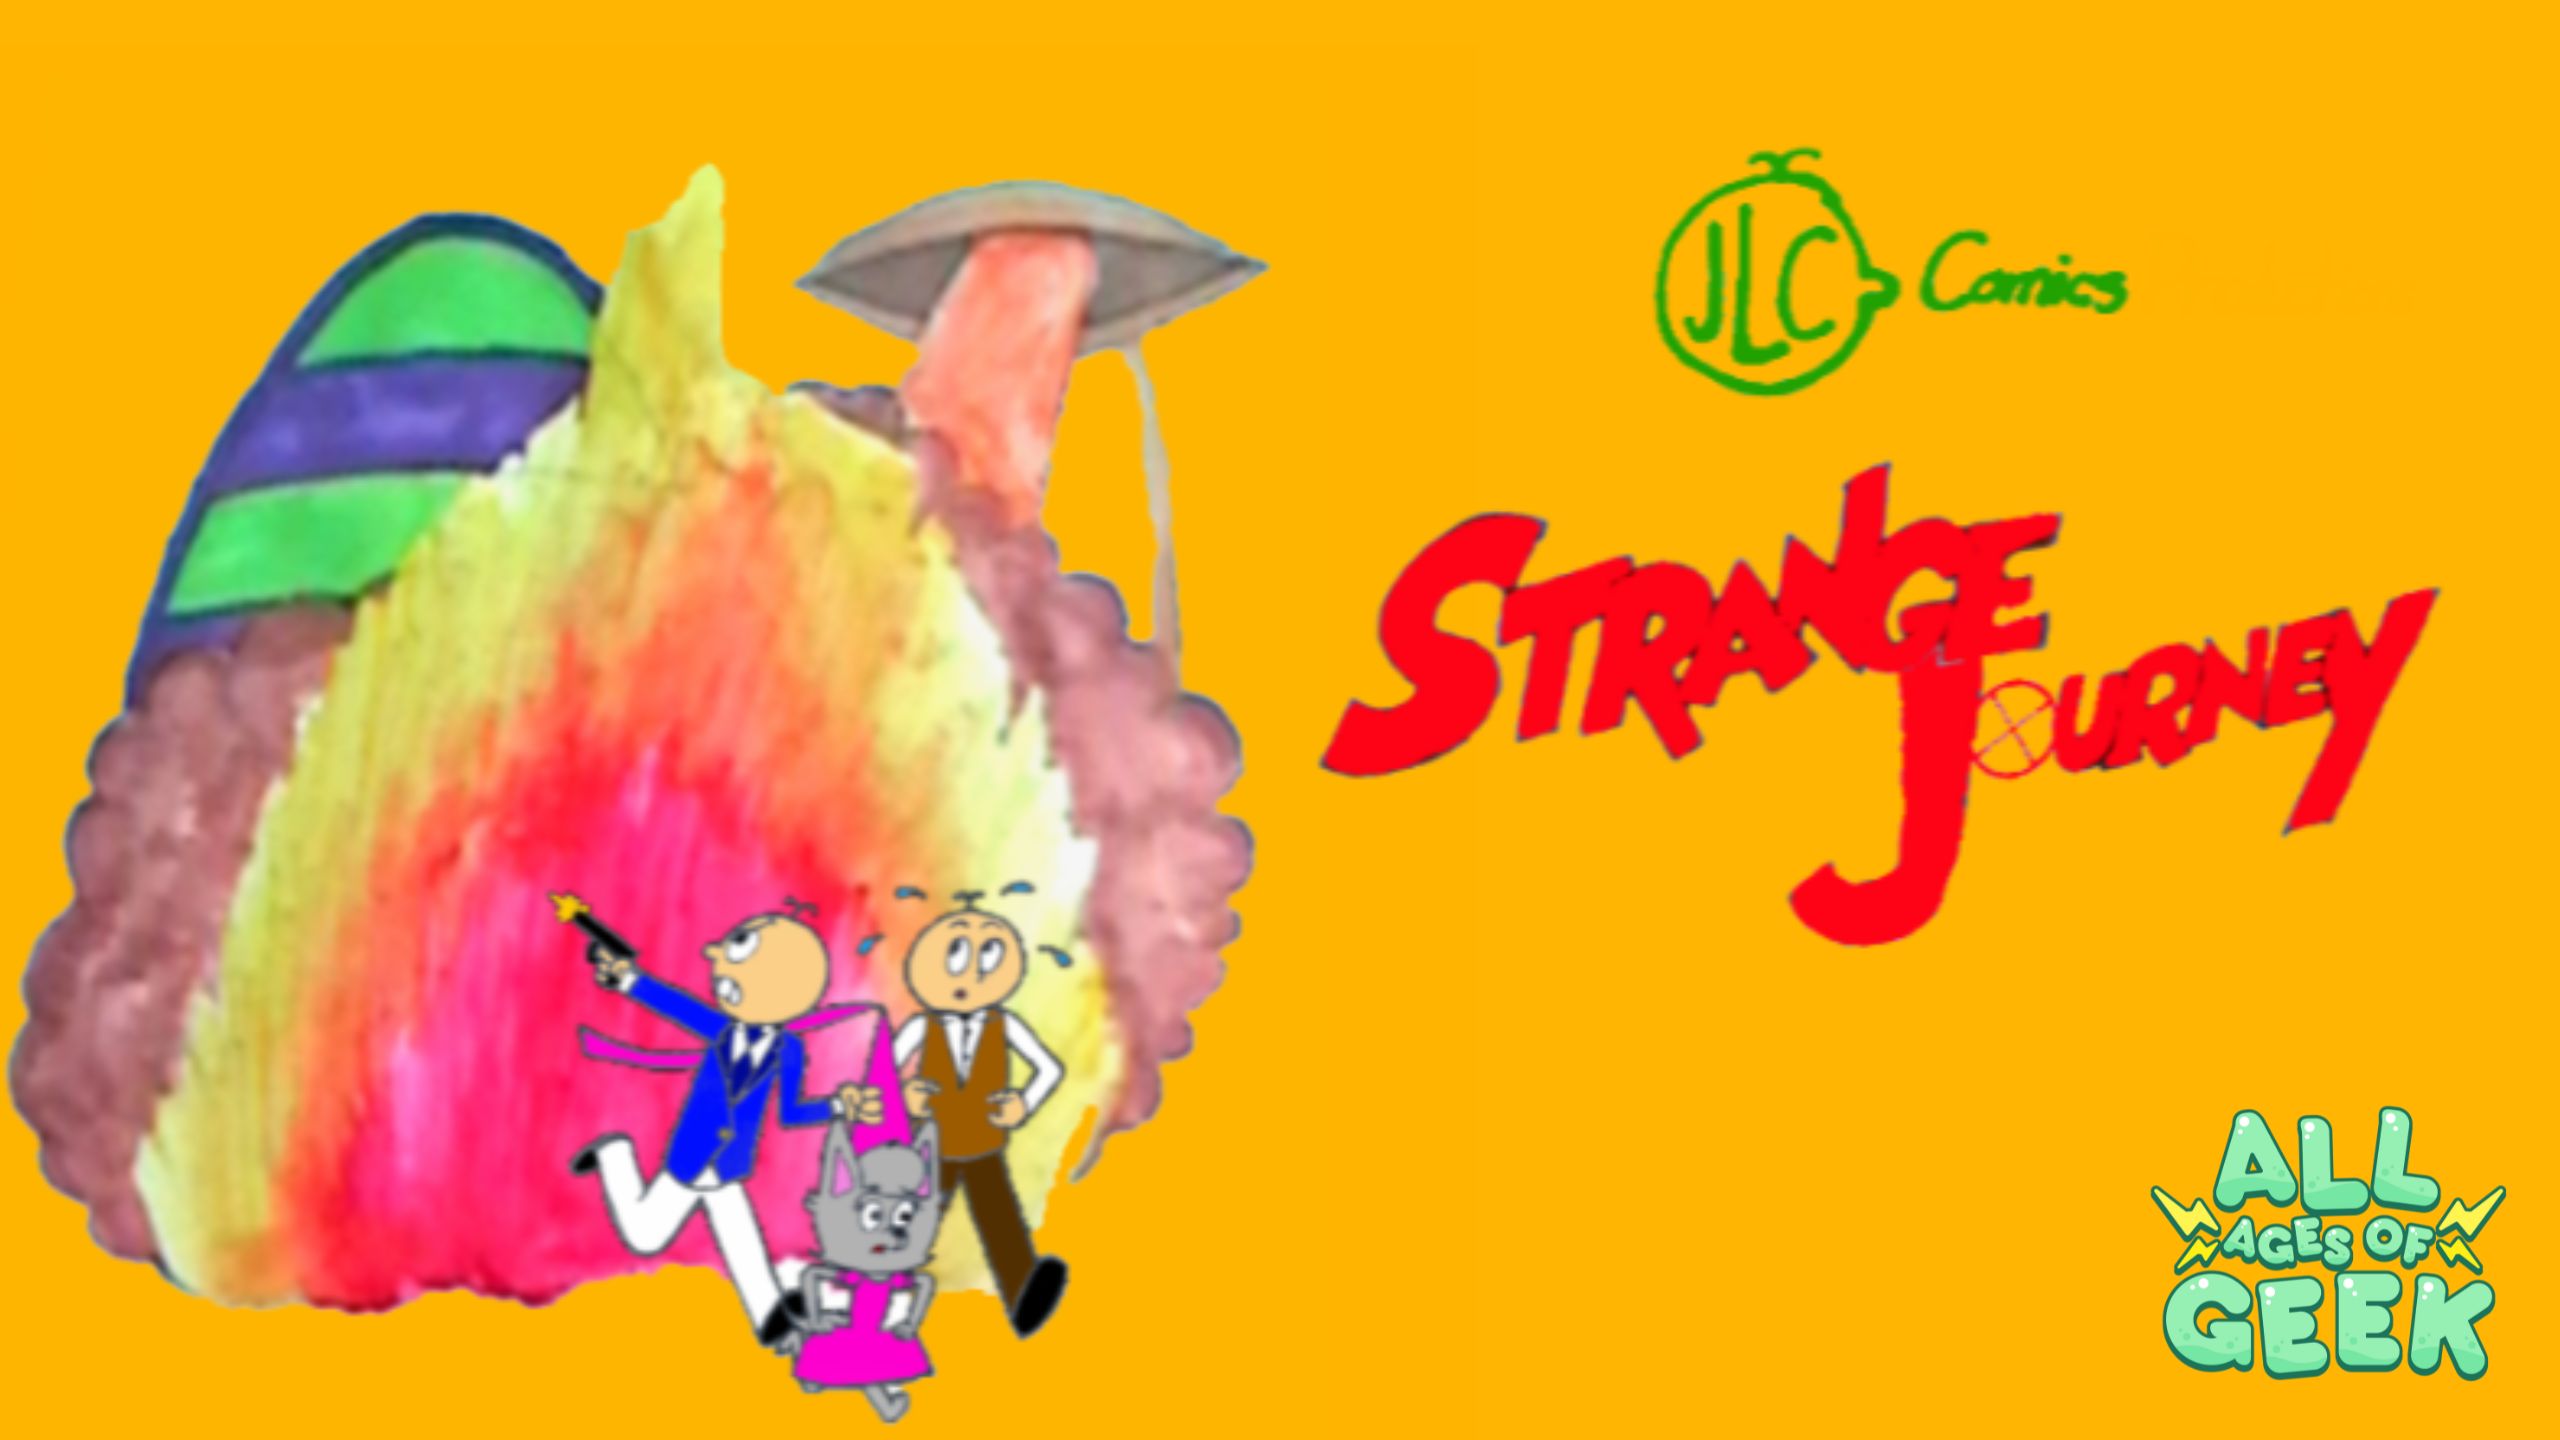 An illustration featuring characters from JLC Comics' "Strange Journey." The scene shows three cartoon characters, one holding a gun, running from a colorful, erupting volcano with a UFO in the background. The title "Strange Journey" is prominently displayed in bold red letters on the right side. The JLC Comics logo is in green at the top right, and the All Ages of Geek logo is in the bottom right corner. The background is a bright yellow.